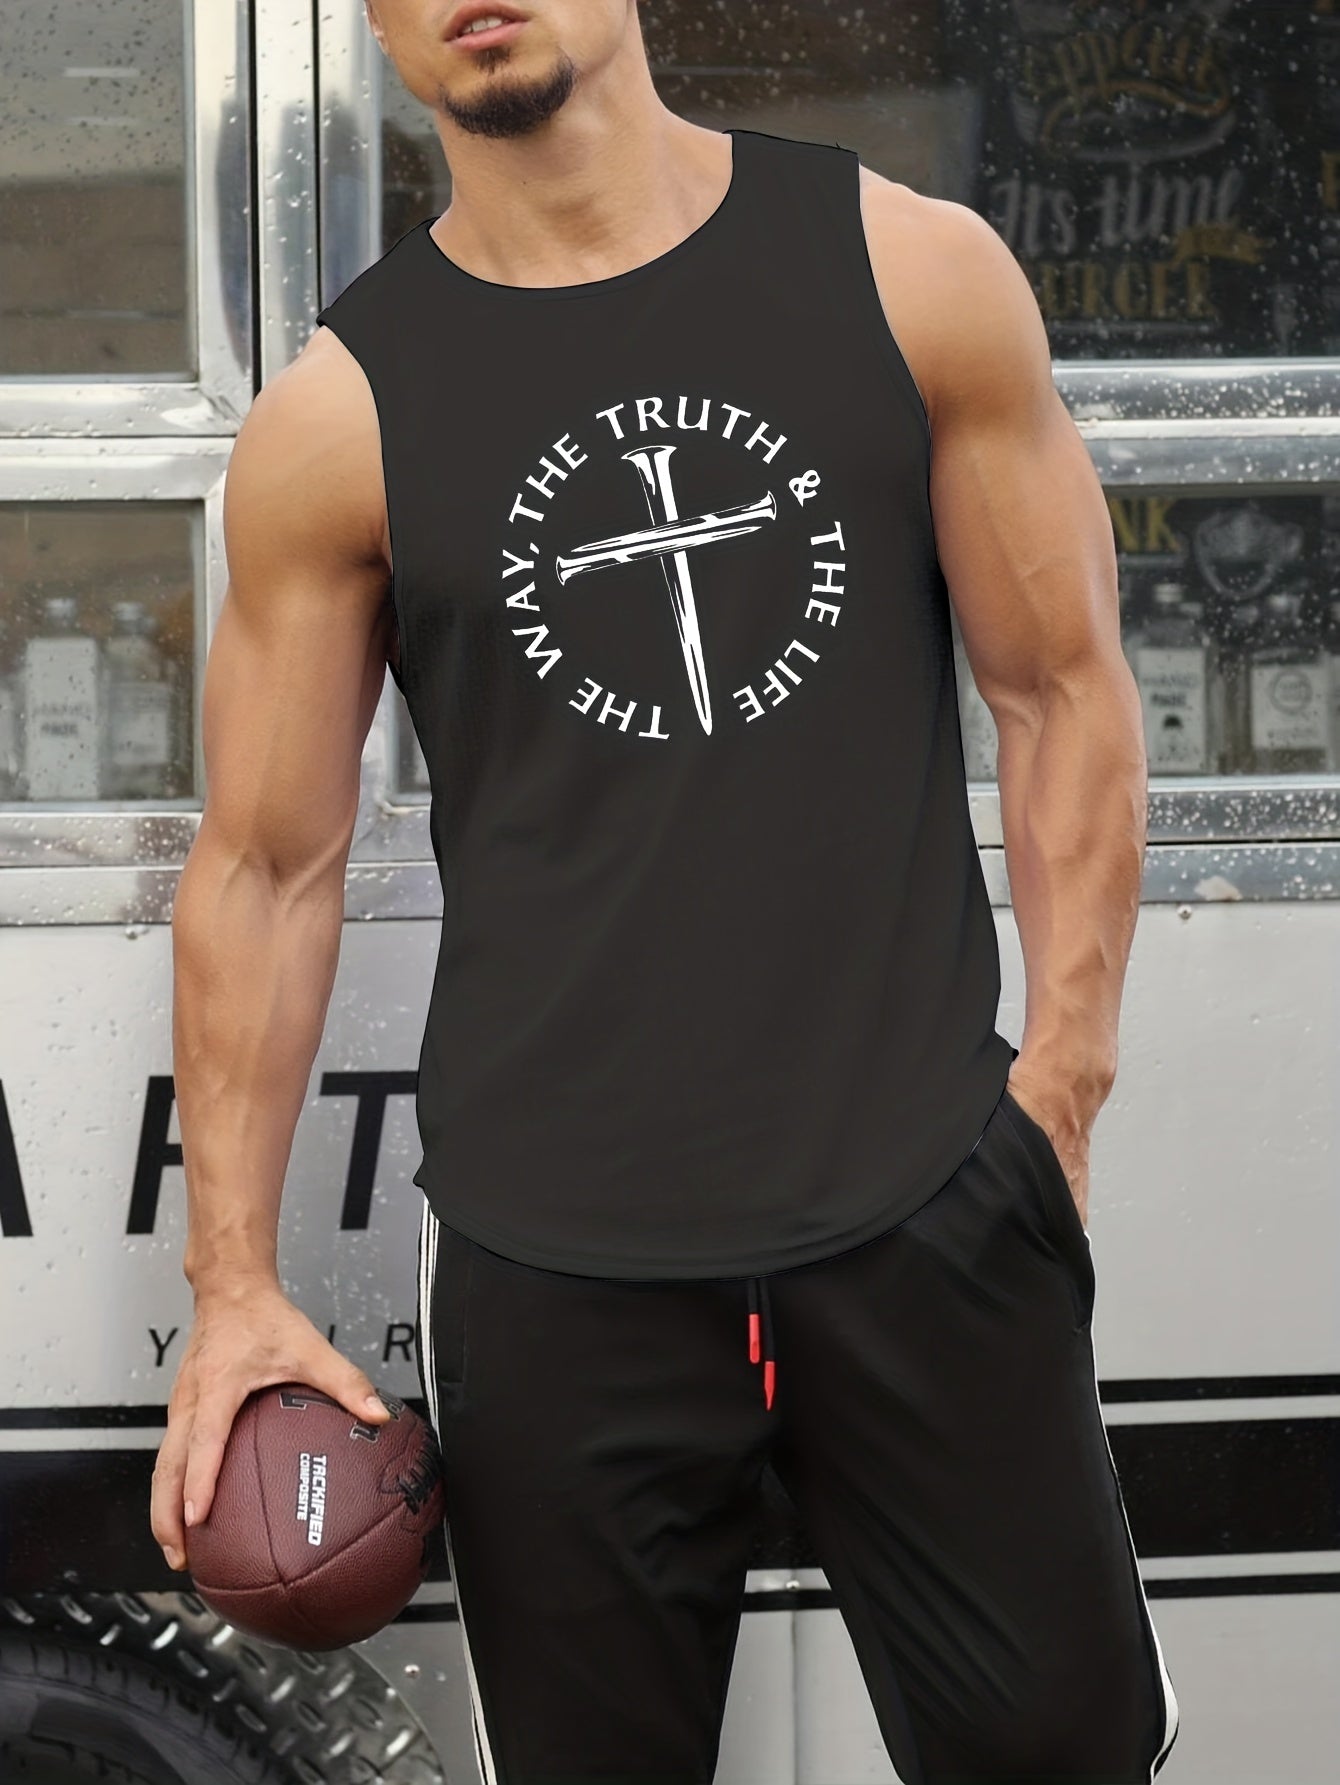 Jesus The Way The Truth The Life Men's Christian Tank Top claimedbygoddesigns